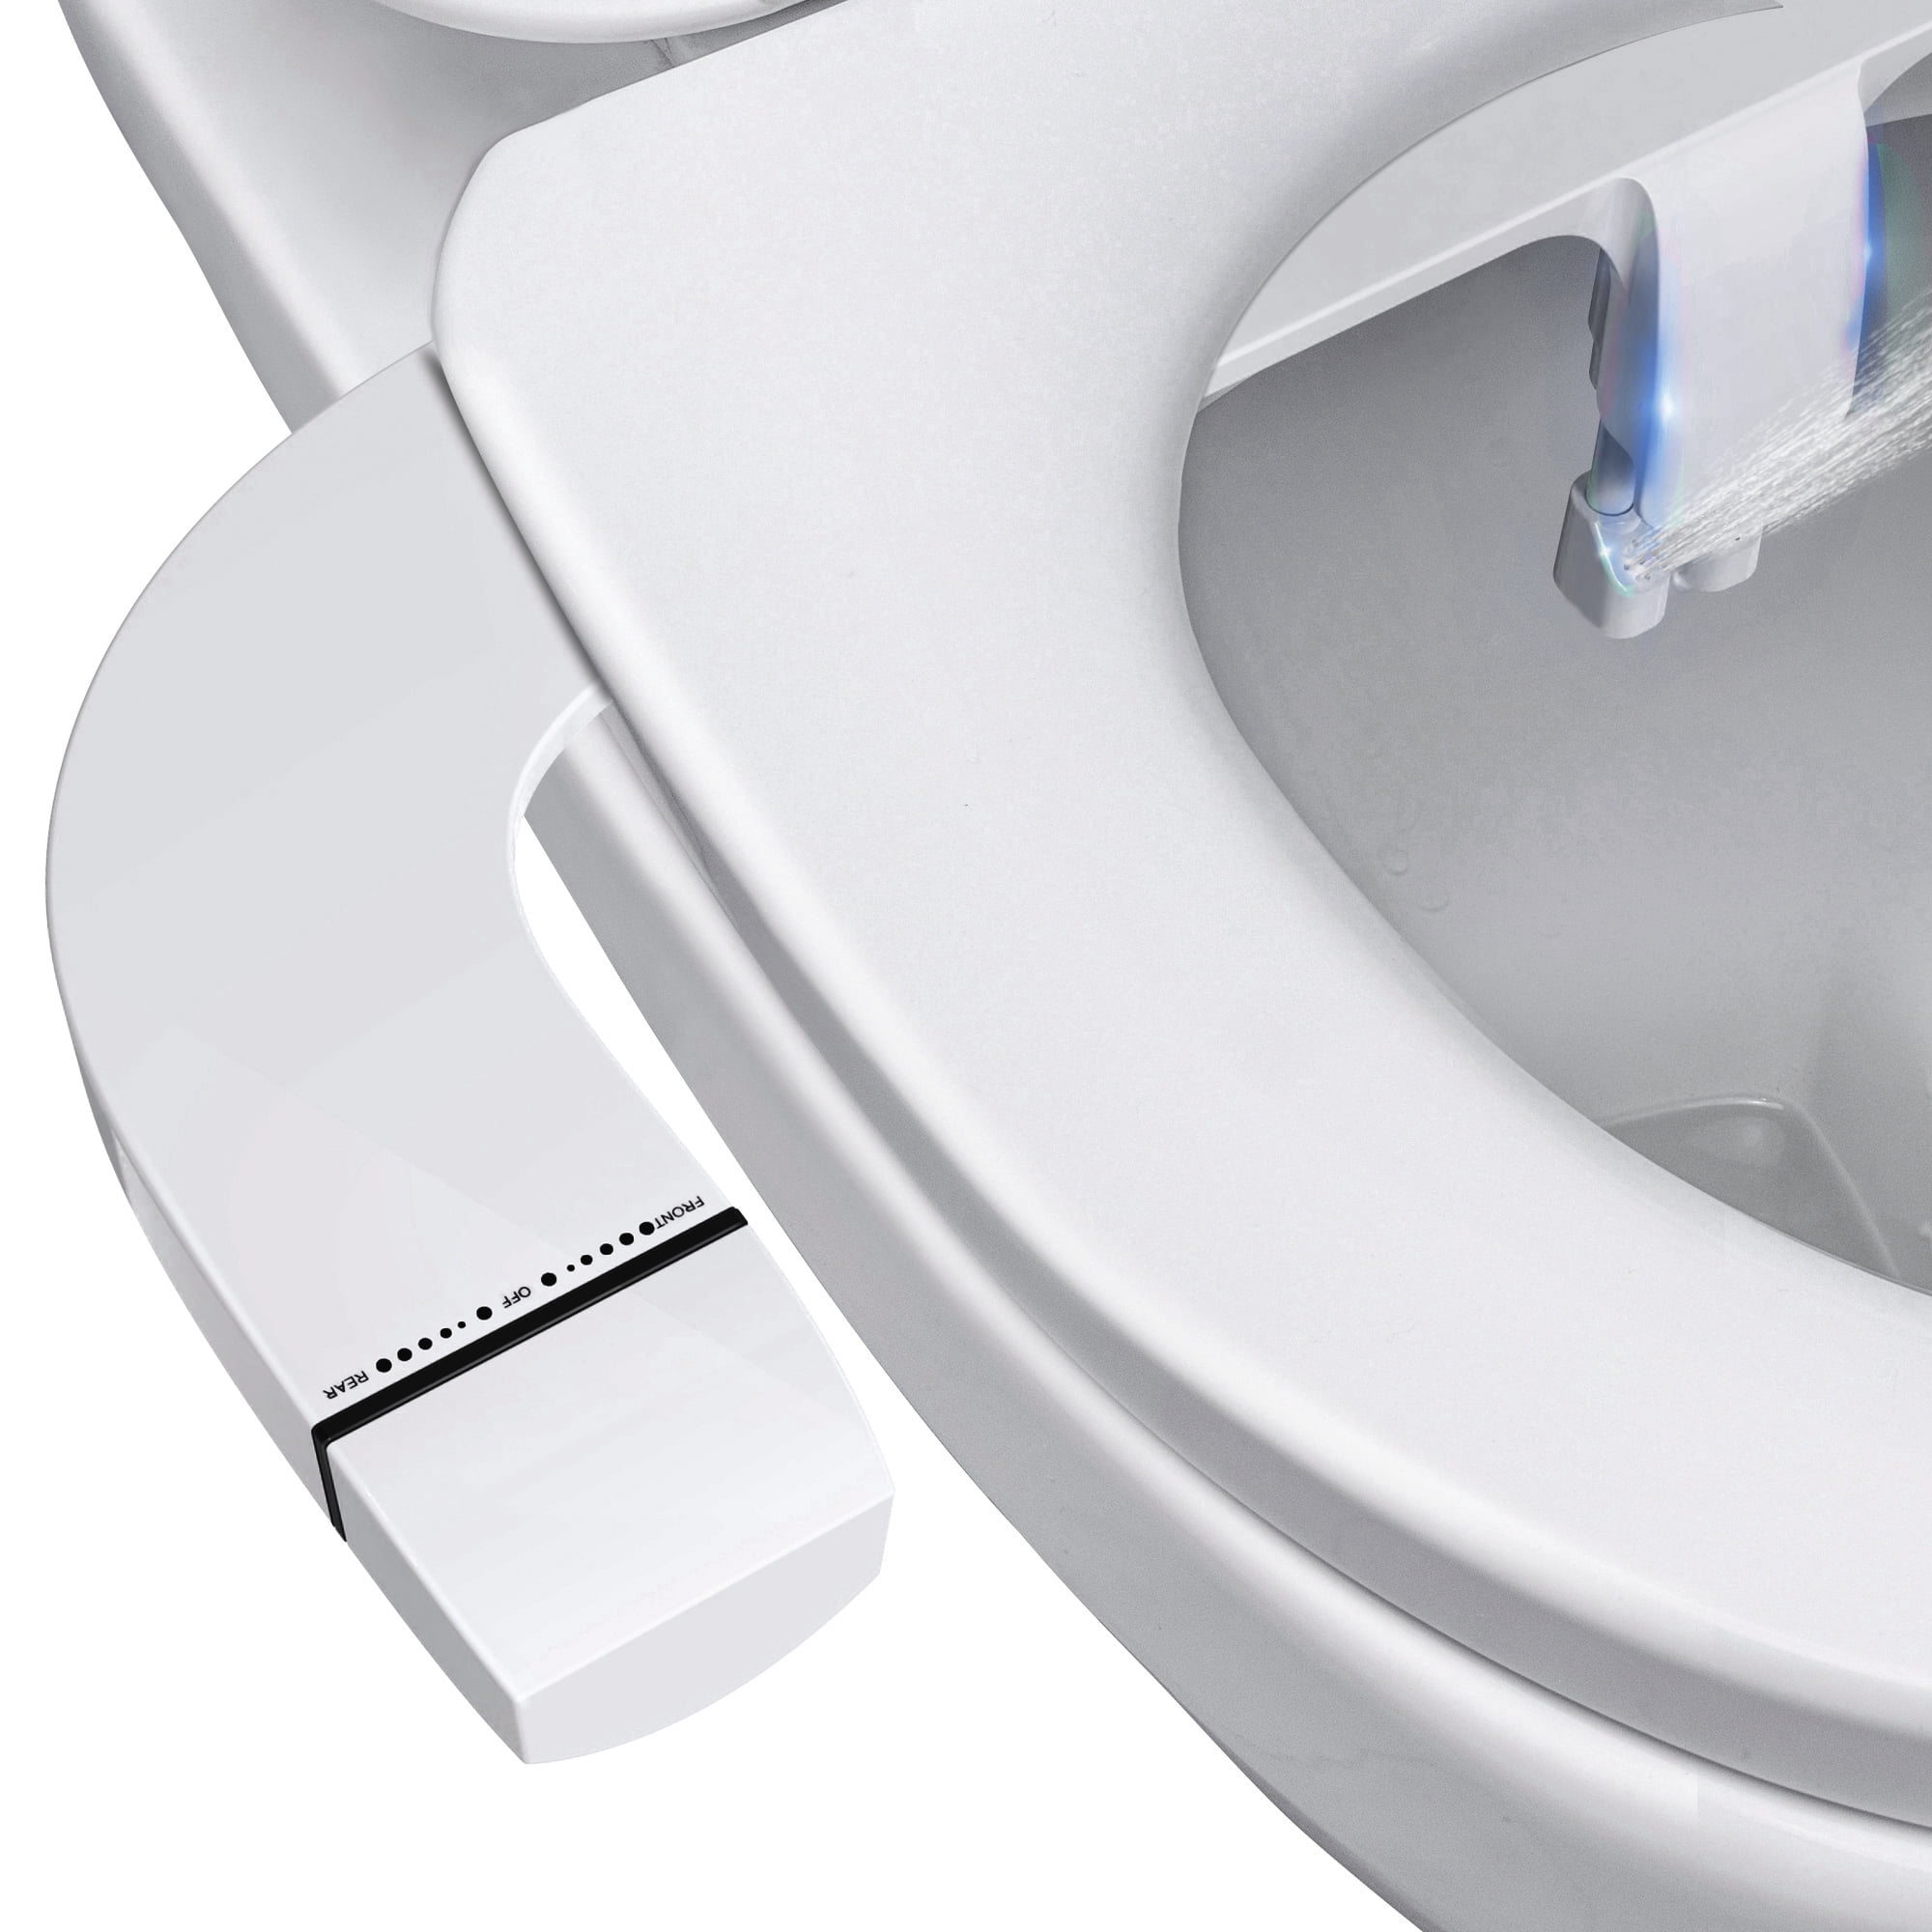 How to Clean a Toilet and Bidet: 8 Easy Steps to Follow